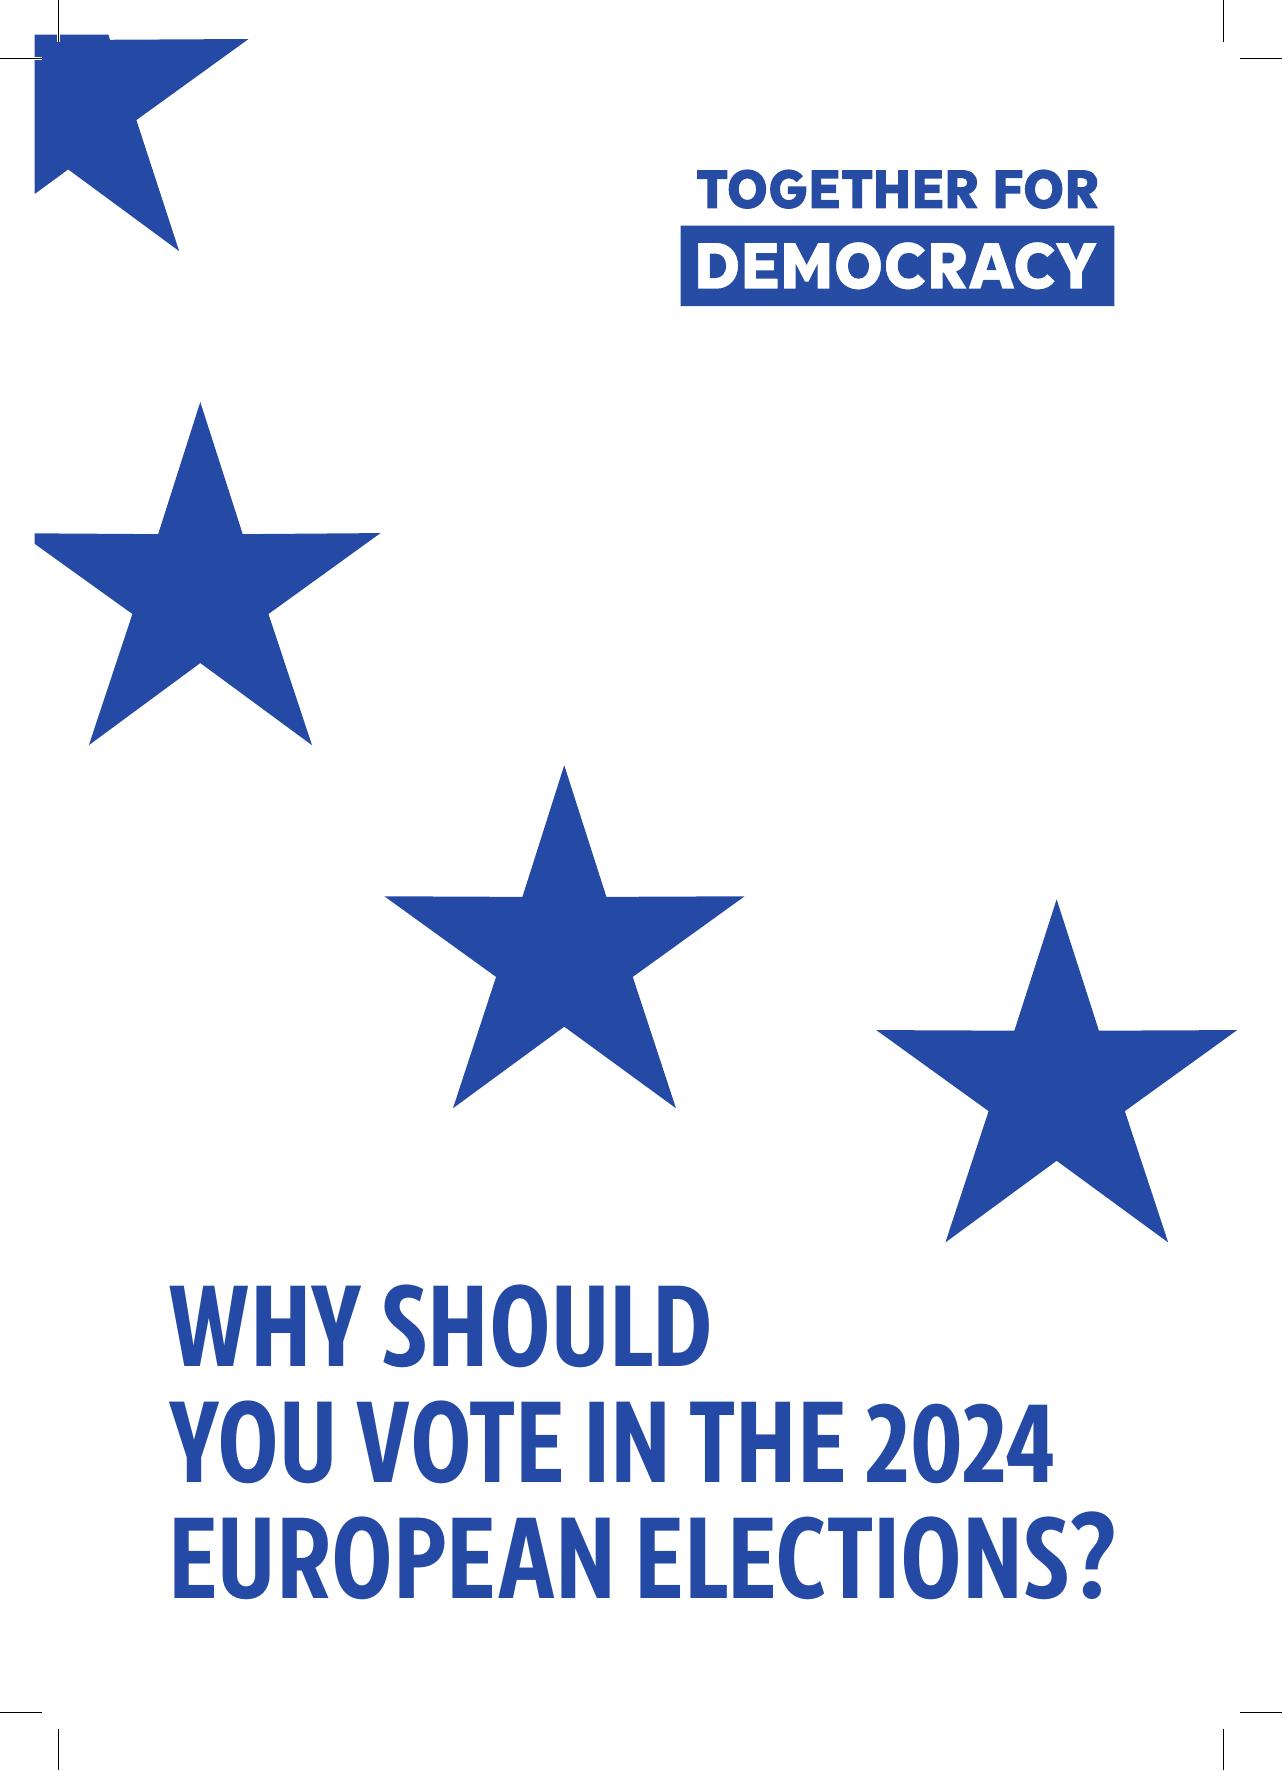 together.eu_Why should you vote in the 2024 European elections_EN.pdf